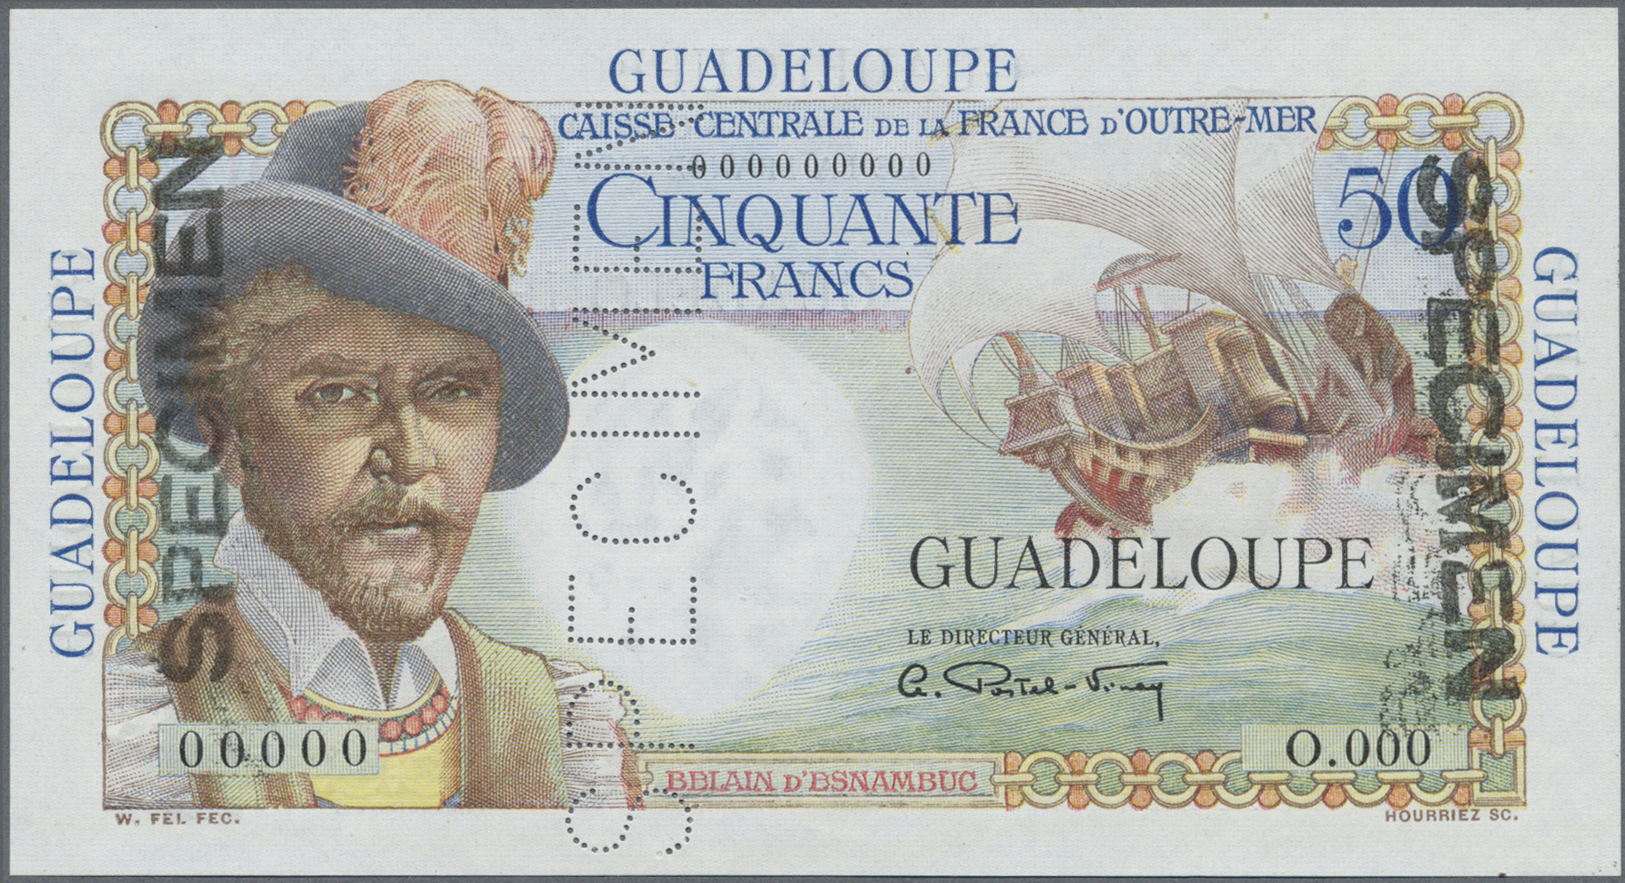 00956 Guadeloupe: 50 Francs ND Specimen P. 34s, Perforated SPECIMEN In Center, Stamped SPECIMEN At Borders, Zero Serial - Other - America